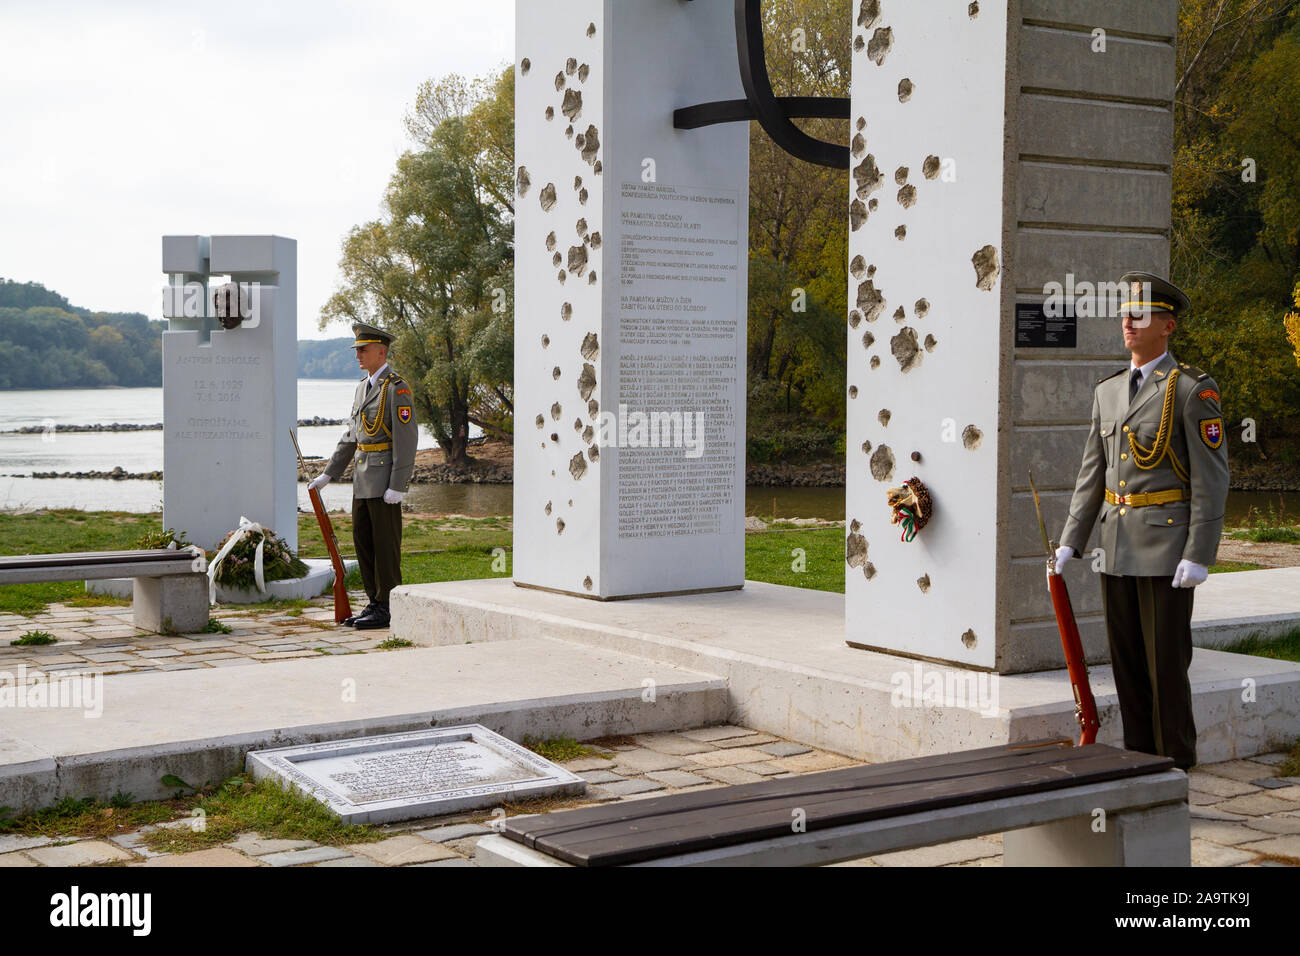 The Slovak guard of honour at the monument 'Brana Slobody' (Gate of Freedom) commemorating people who were killed on the border trying to escape. Stock Photo